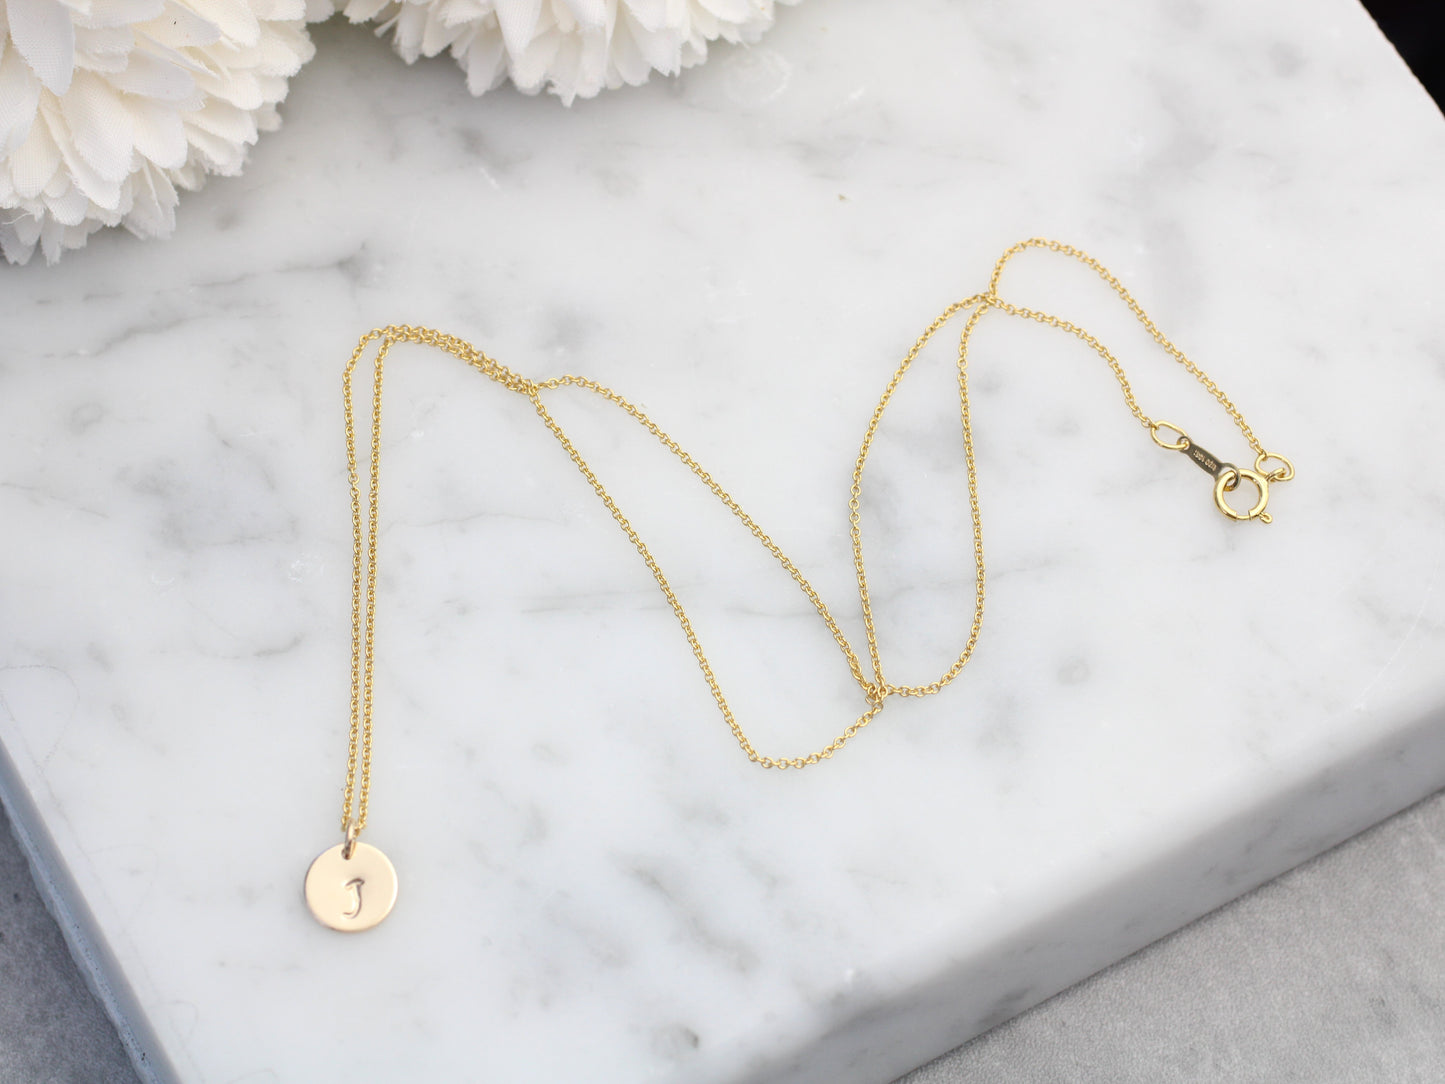 Initial necklace in gold. Valentines day necklace.